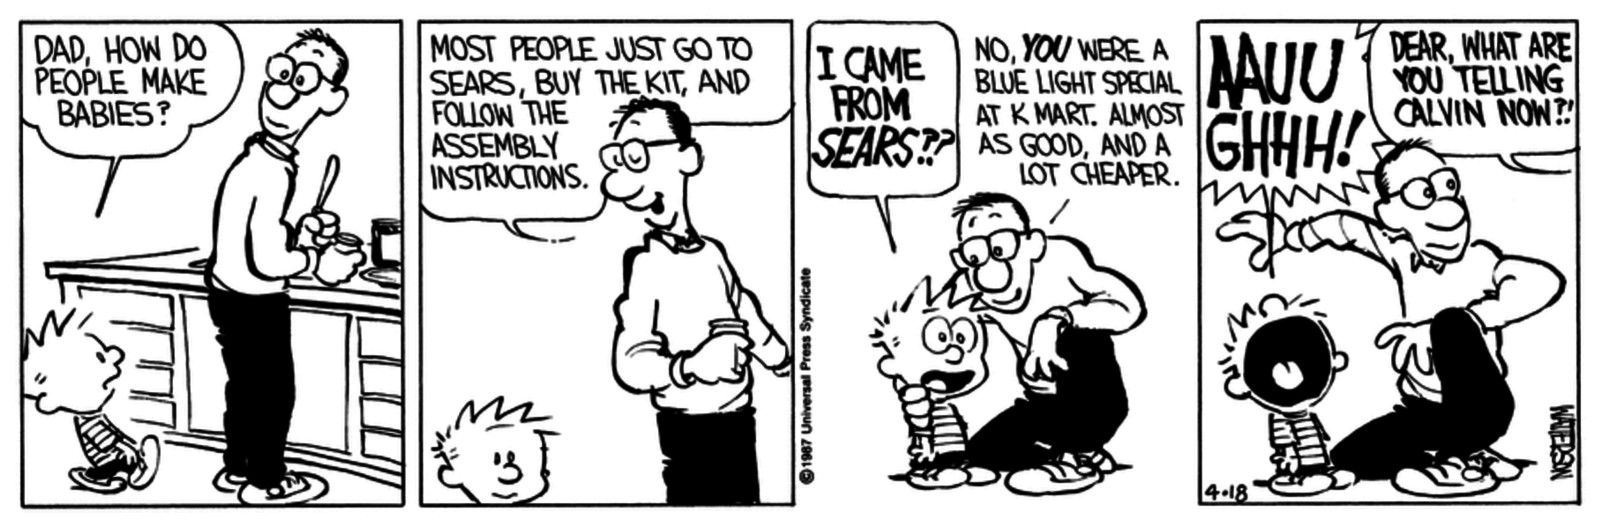 calvin and hobbes strip, calvin asks his dad were babies come from and he says from k-mart